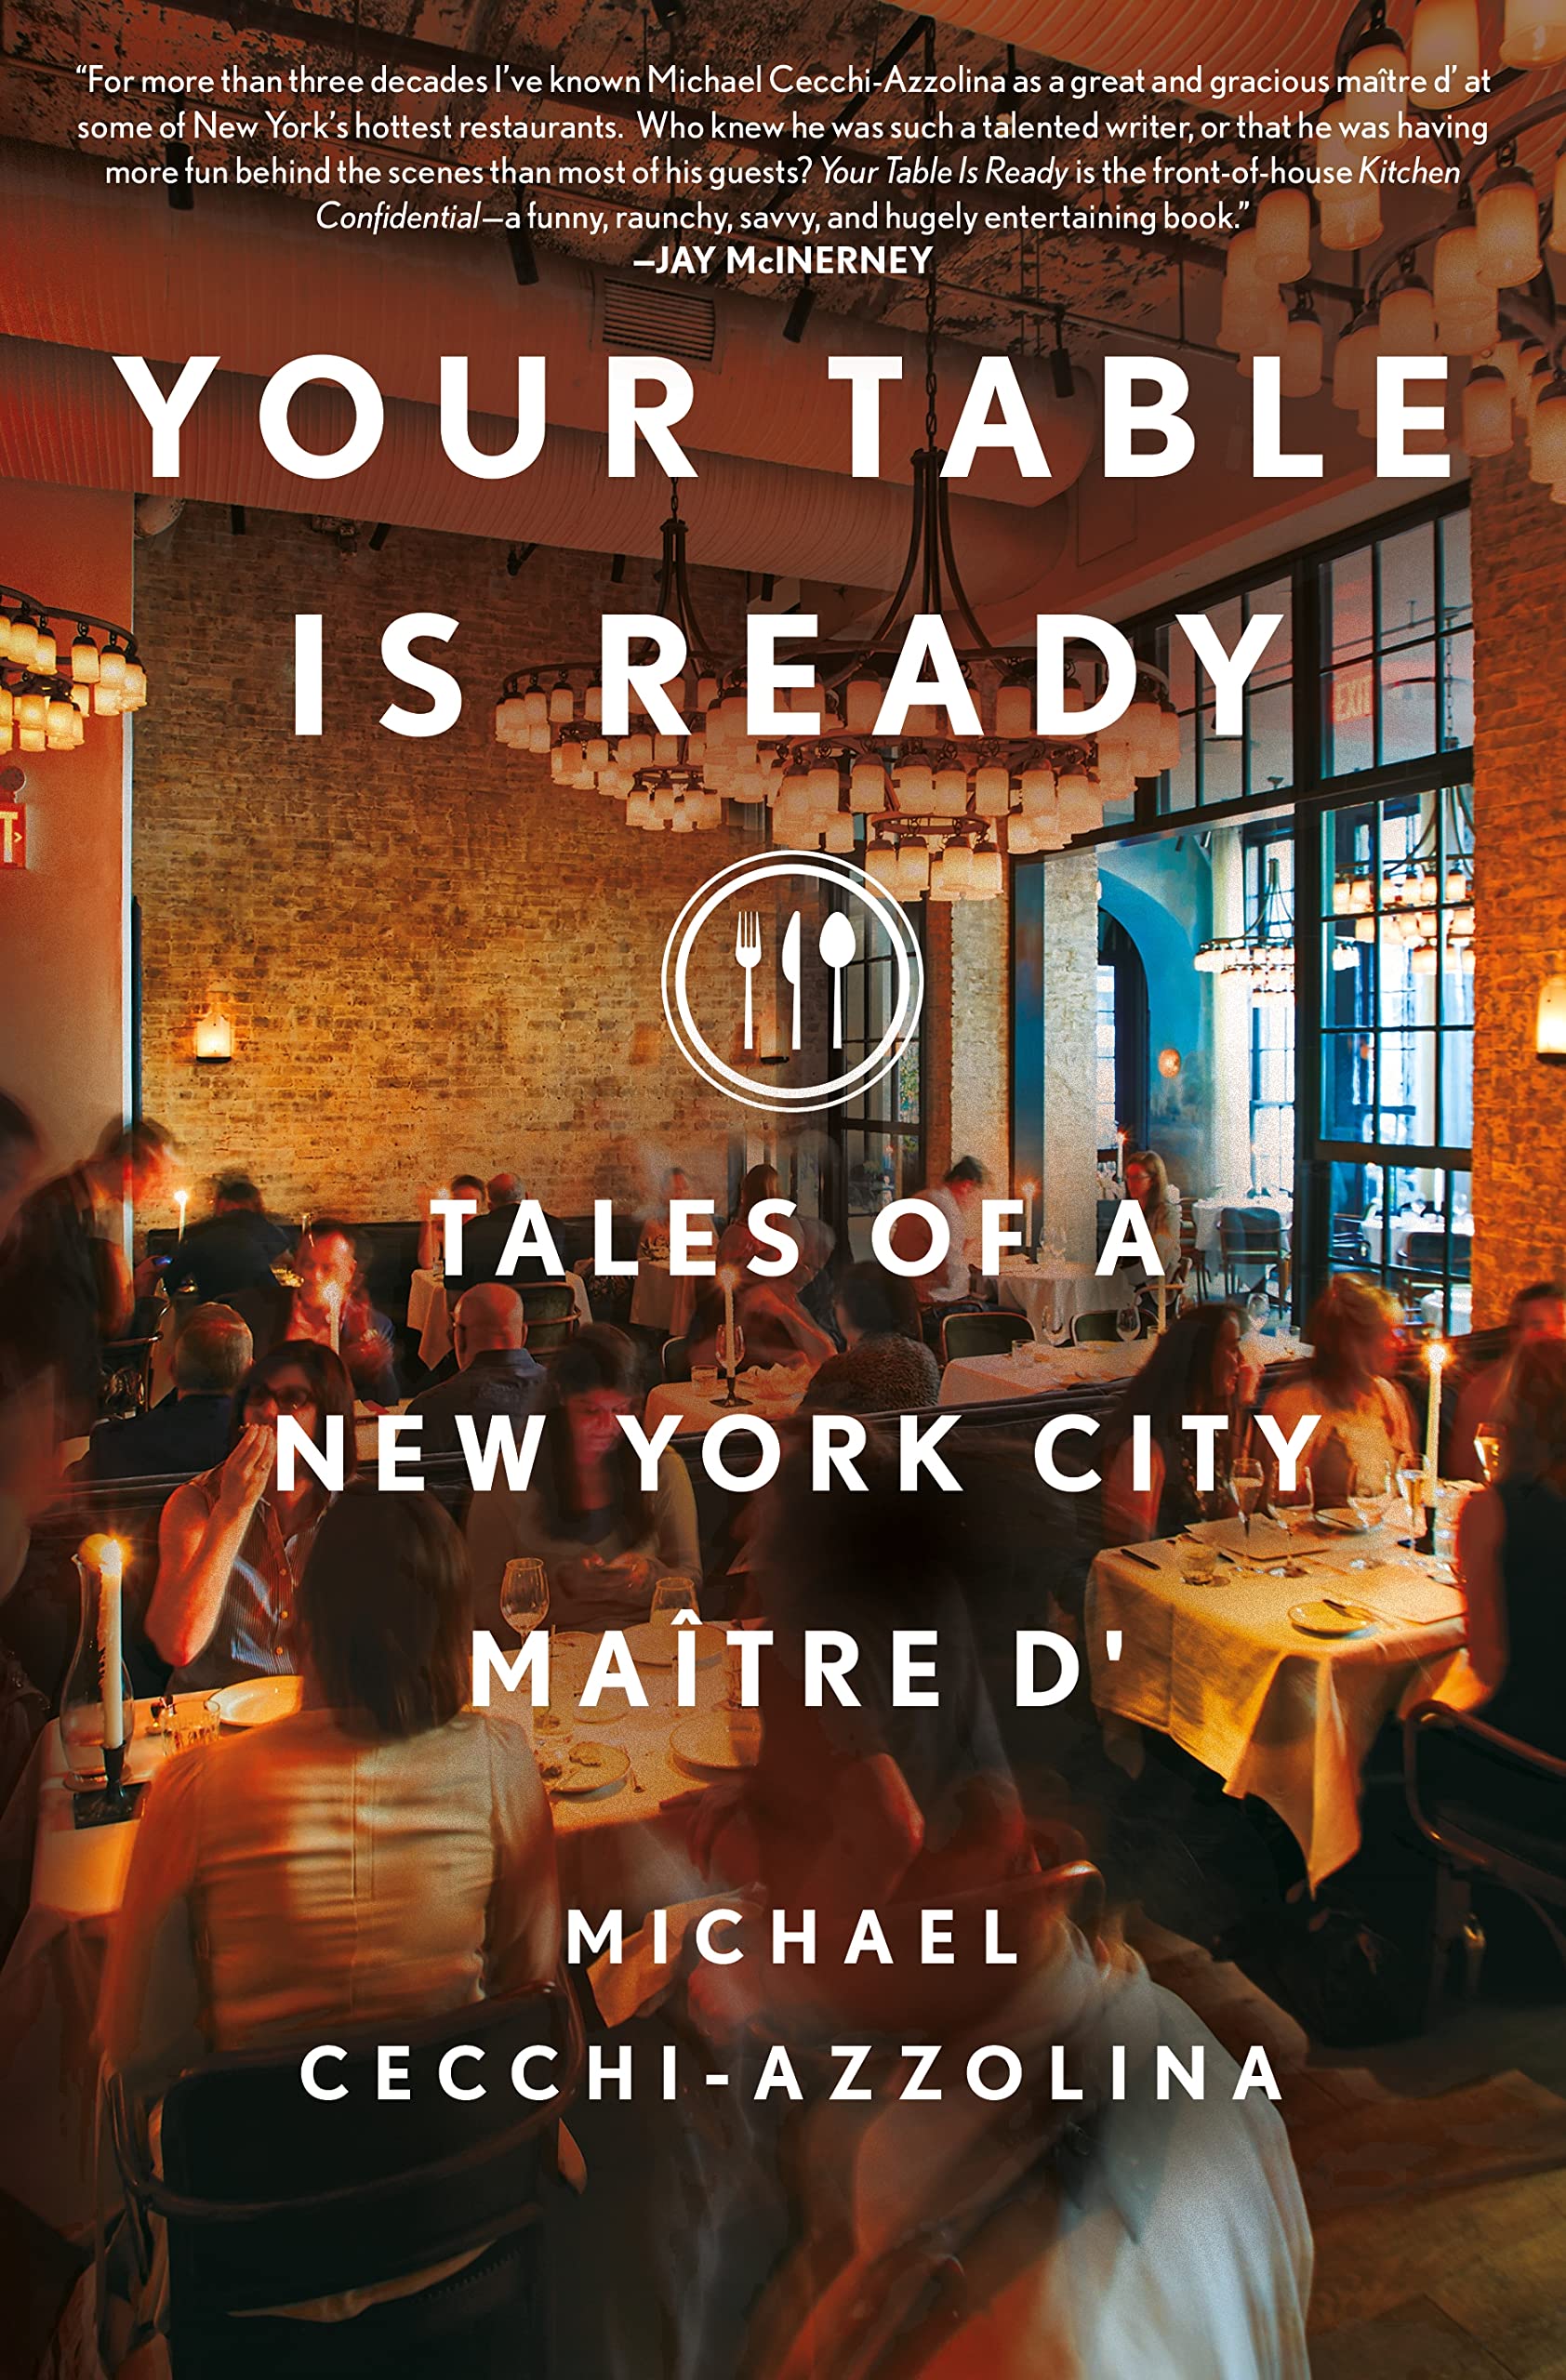 Your Table is Ready: Tales of a New York City Maitre D' (Michael Cecchi-Azzolina)